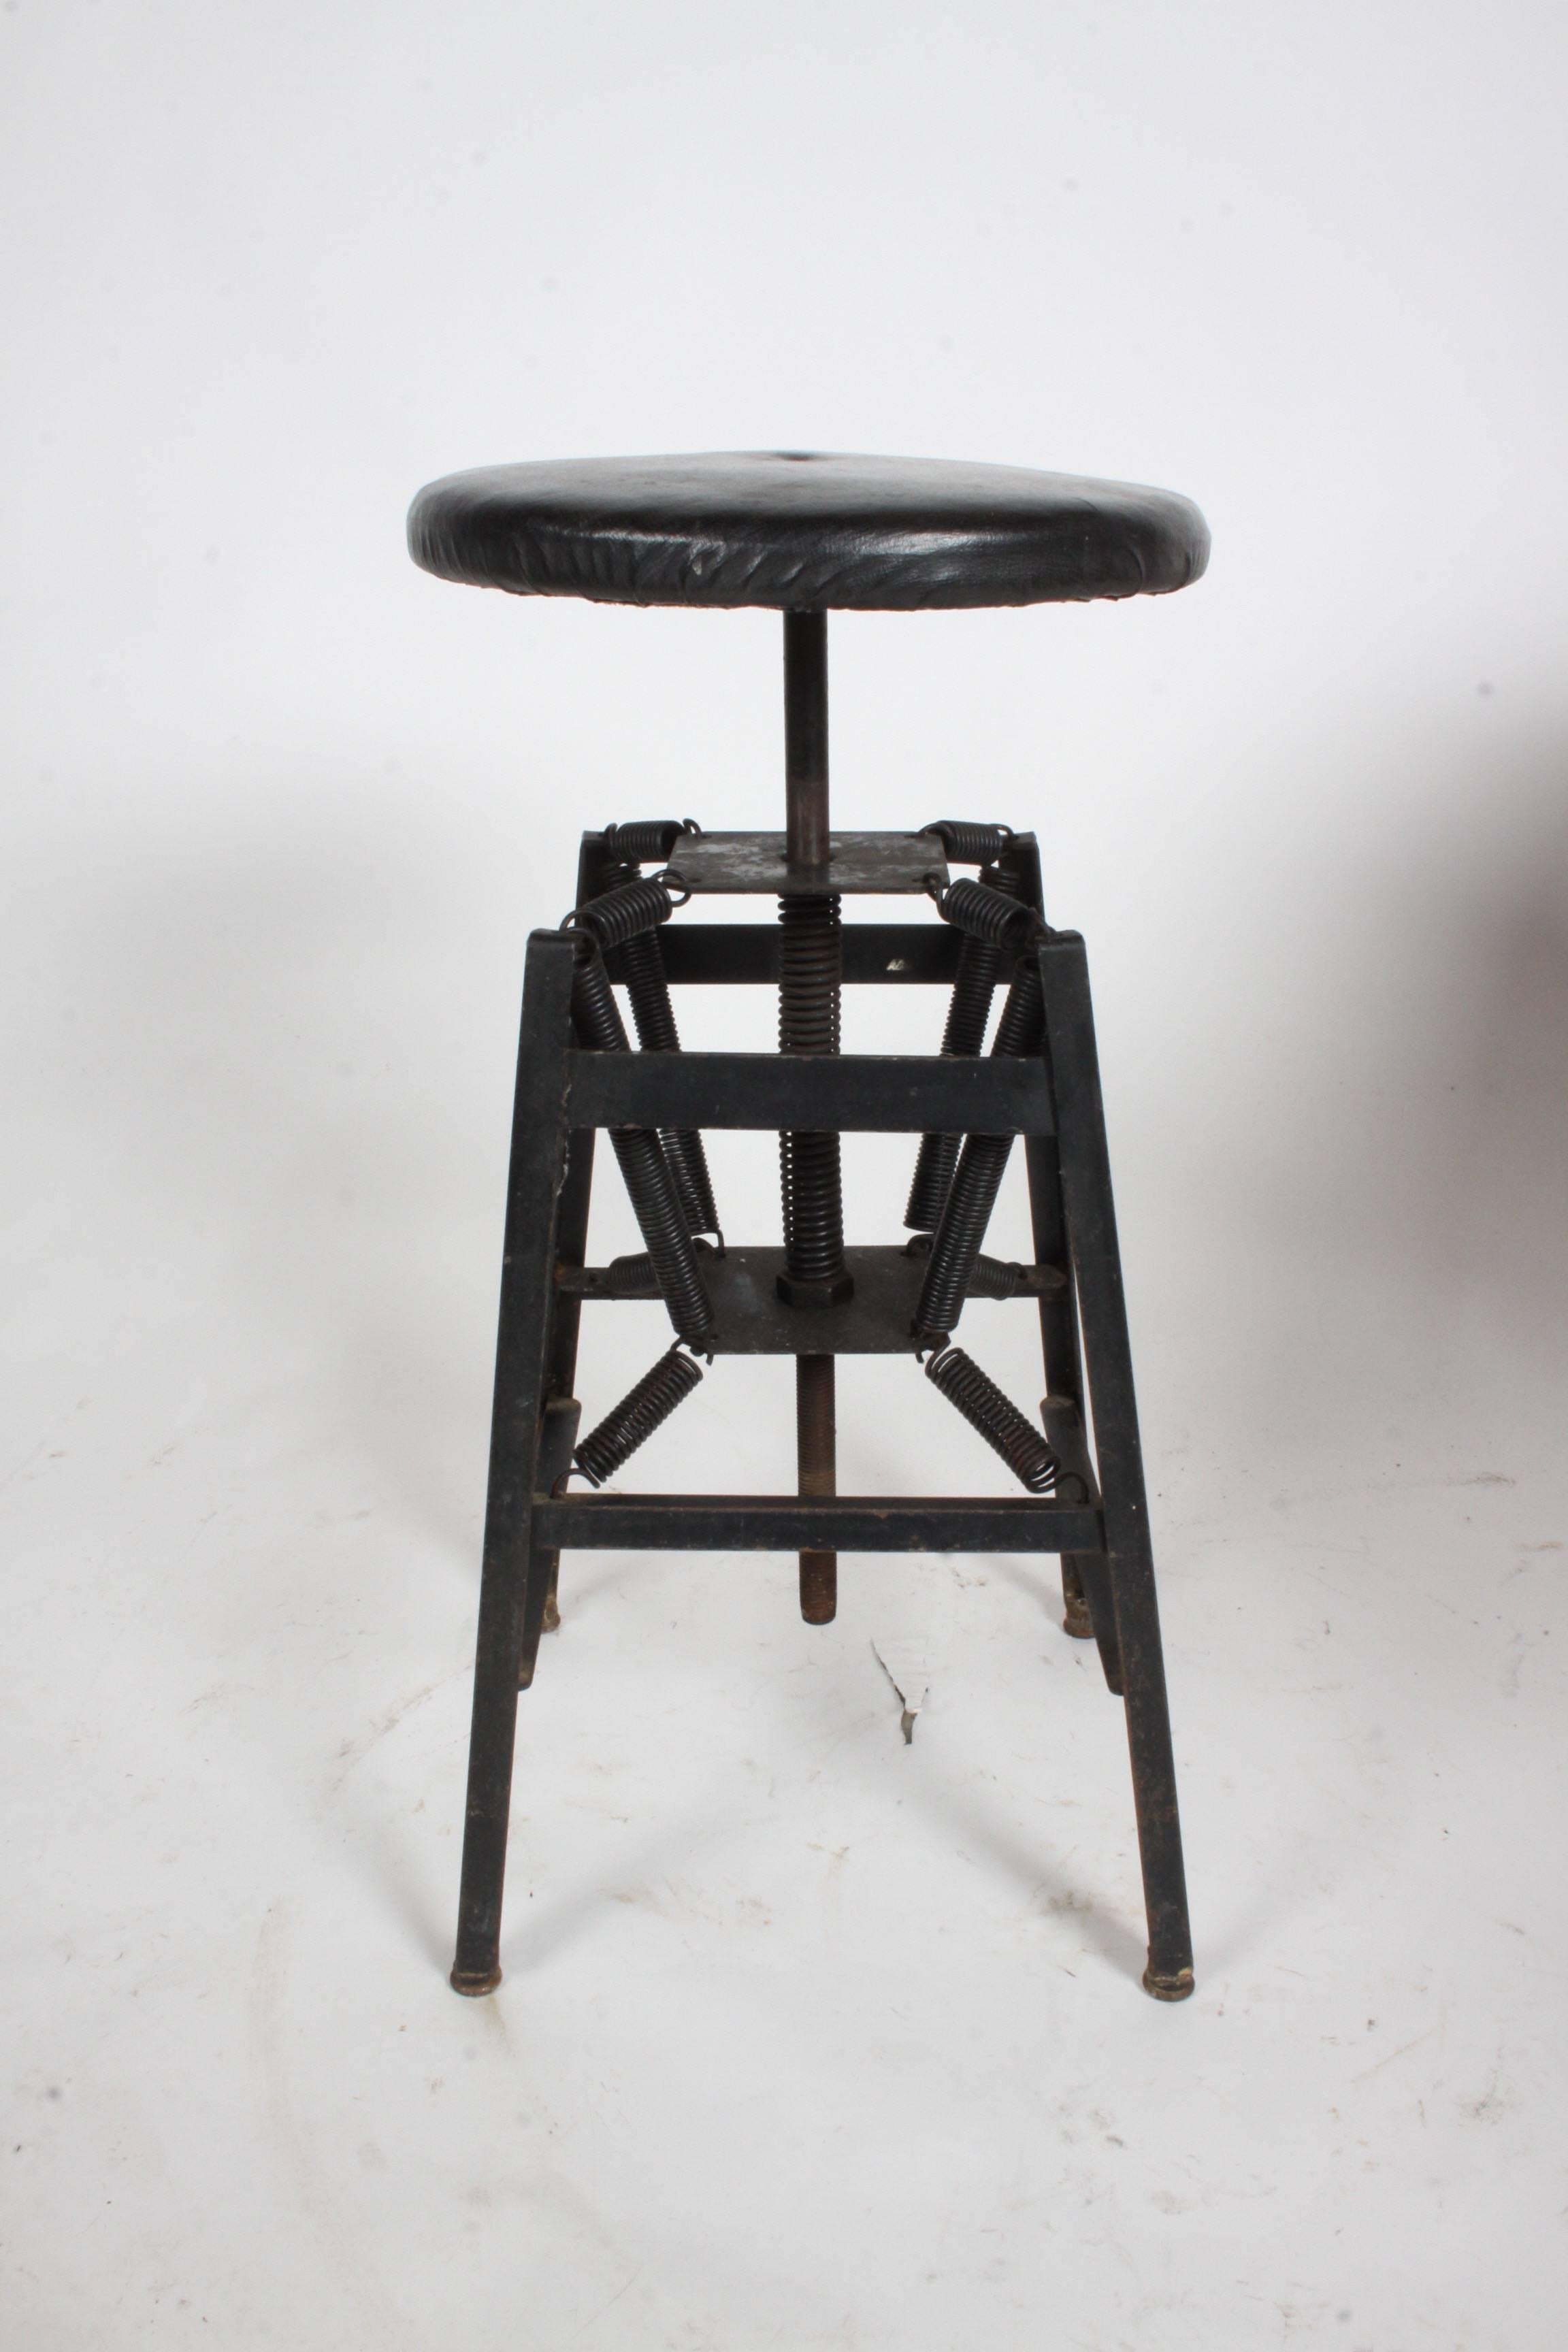 Charles E. Miller for American Cabinet Co. designed in the 1920s. This spring suspension had many uses for doctors, dentist, architects or artist. This design reminds me of the Eiffel Tower chair base design by Charles Eames for Herman Miller. This